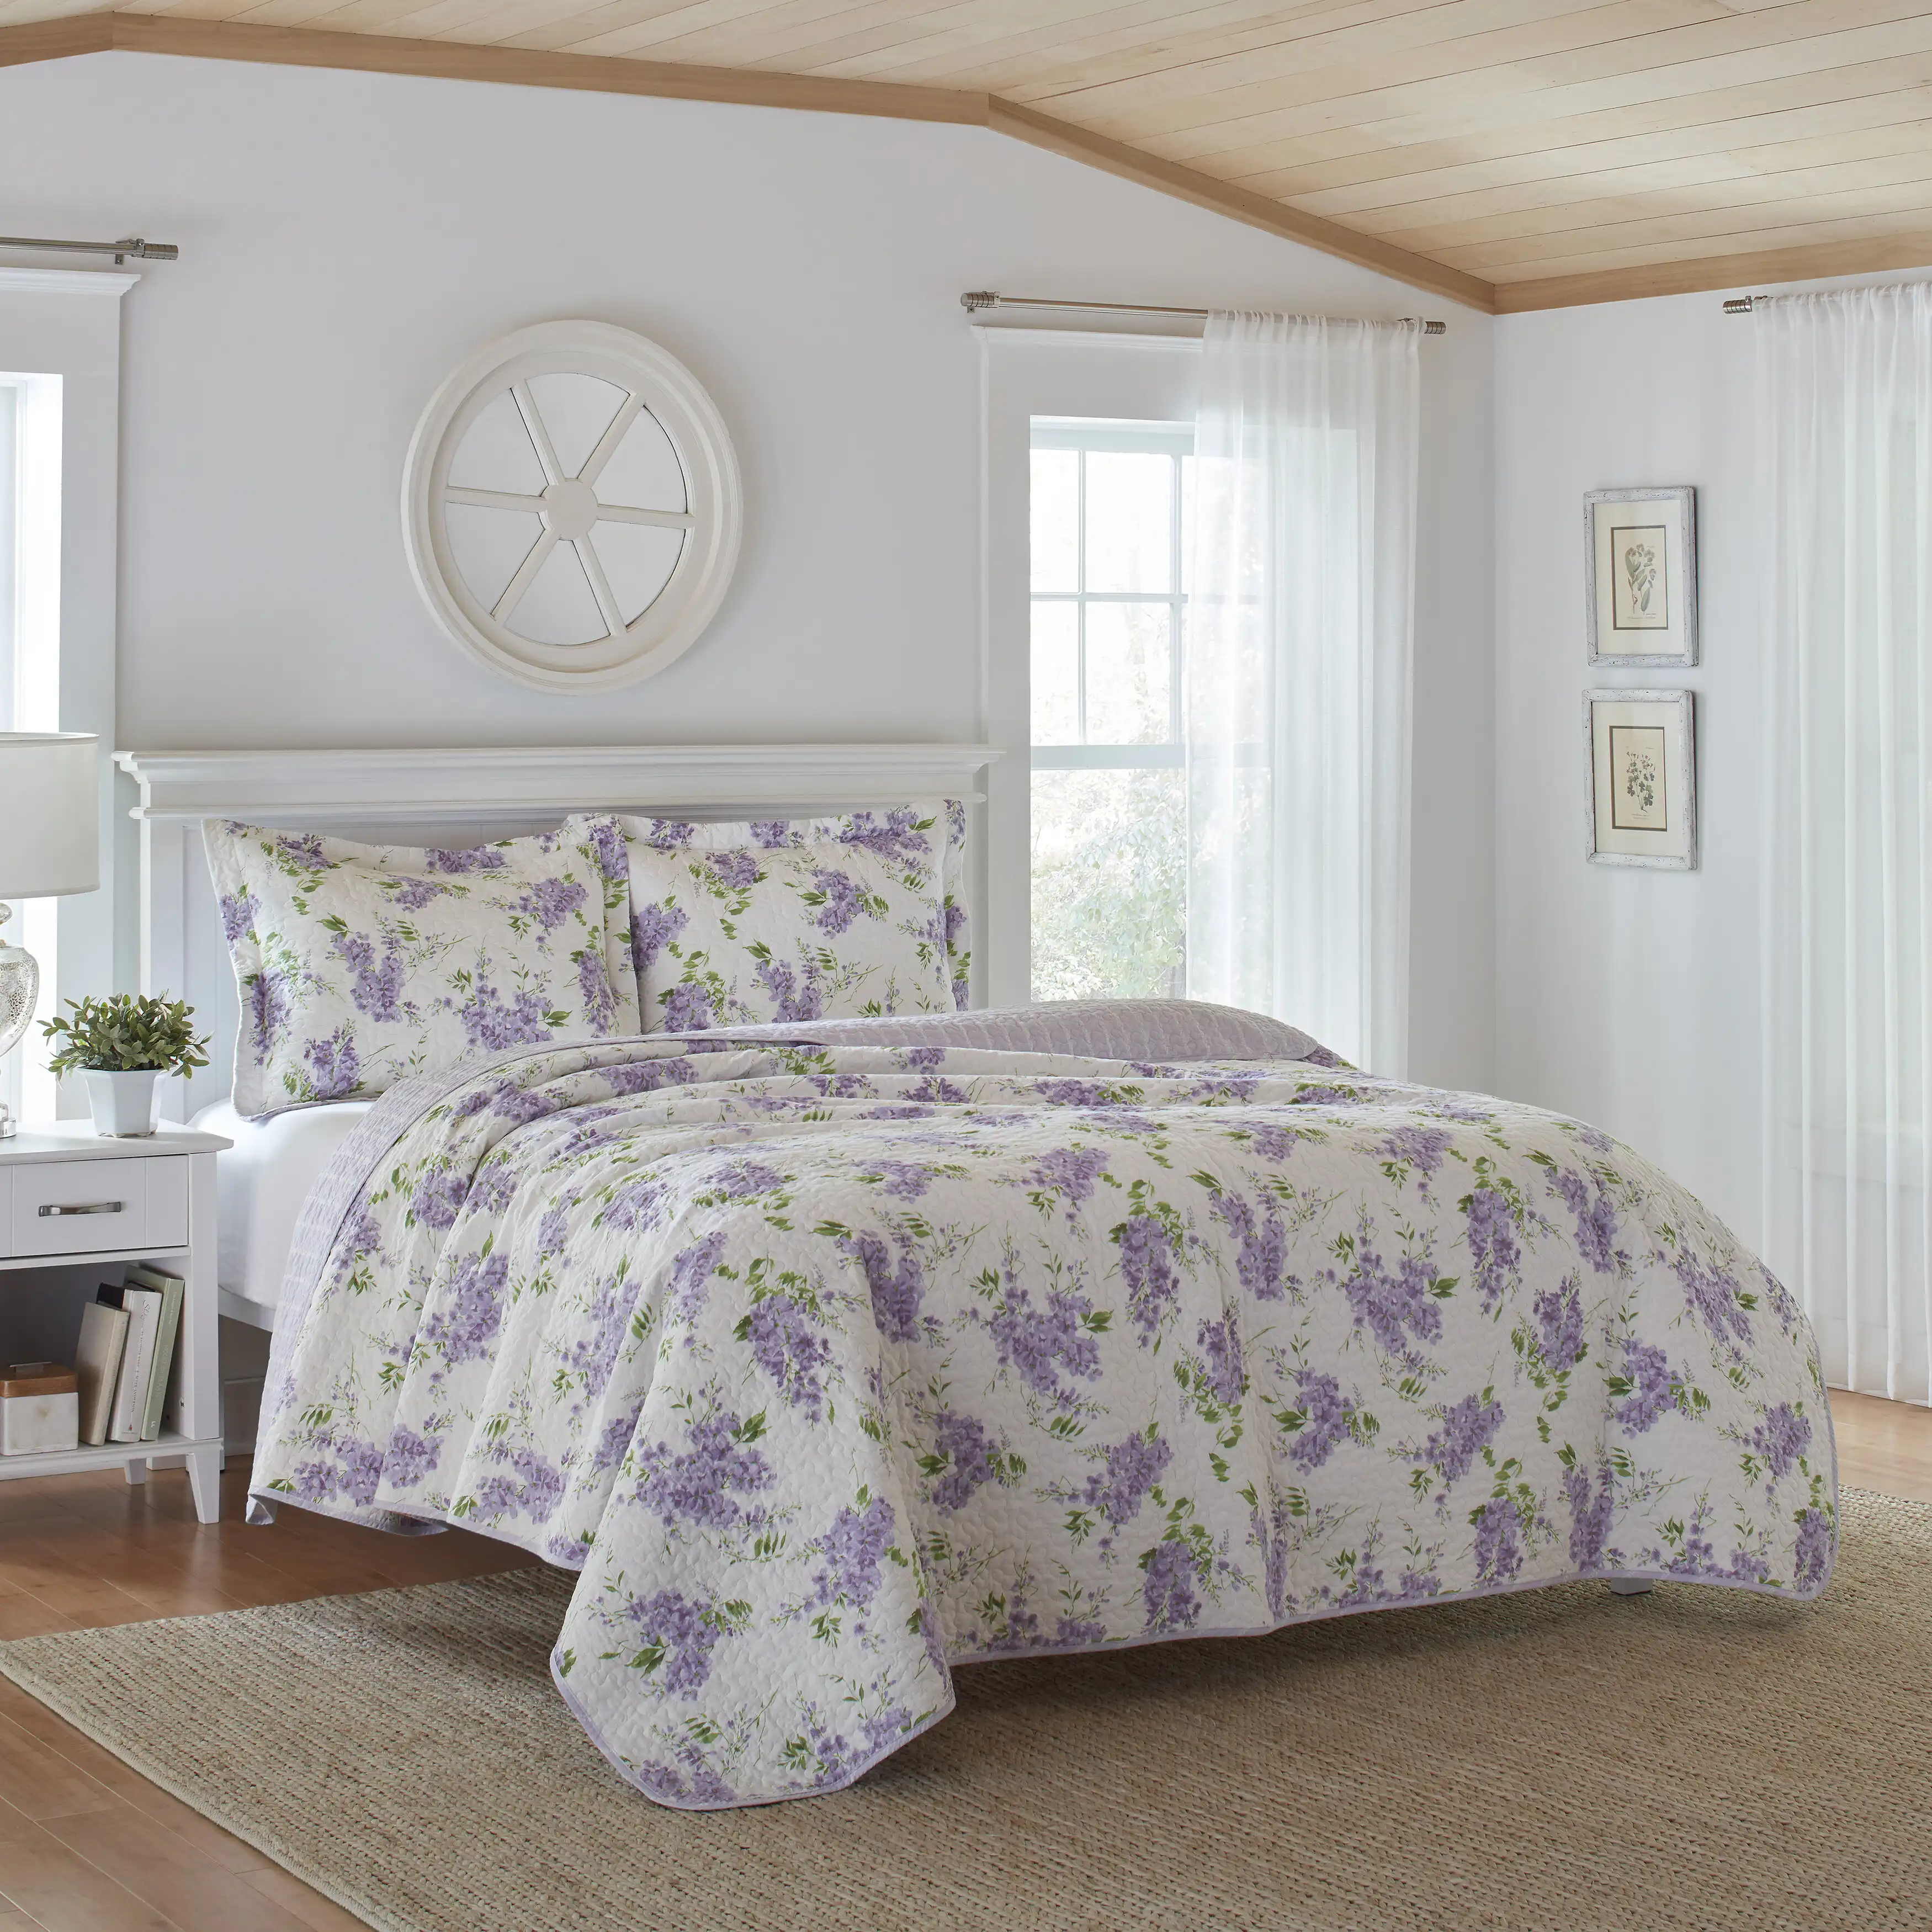 Keighley Purple/White Floral 100% Cotton Reversible Quilt Set